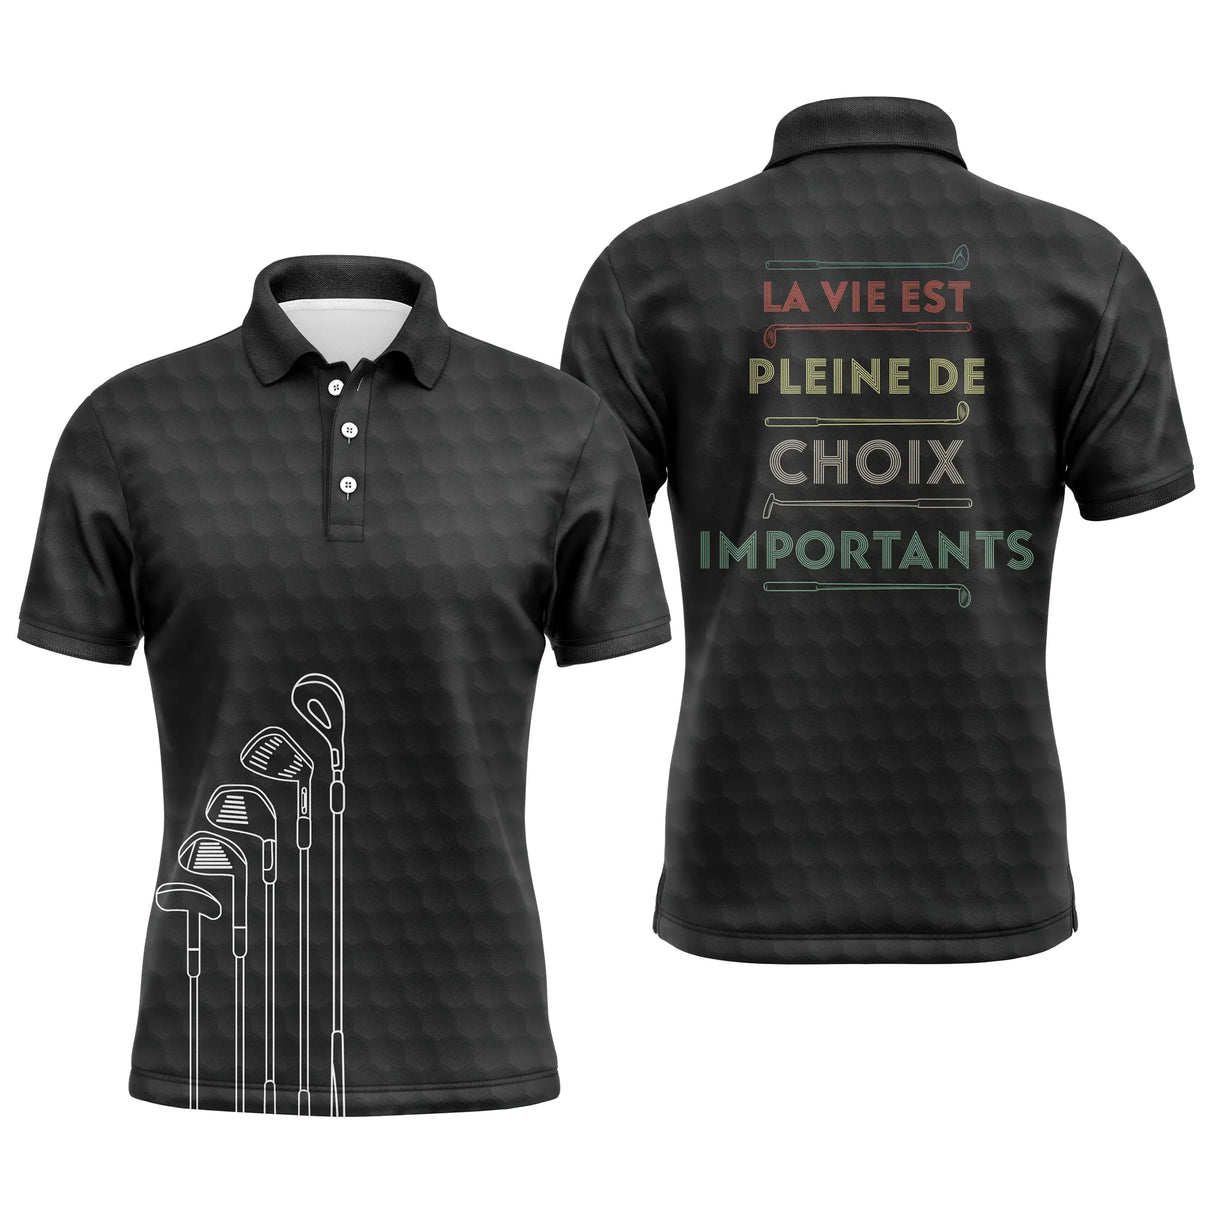 Chiptshirts - Golf Polo Shirt, Original Gift for Golf Fans, Men's and Women's Sports Polo Shirt, Golf Club, Retro Vintage, Life is Full of Important Choices - CTS26052234